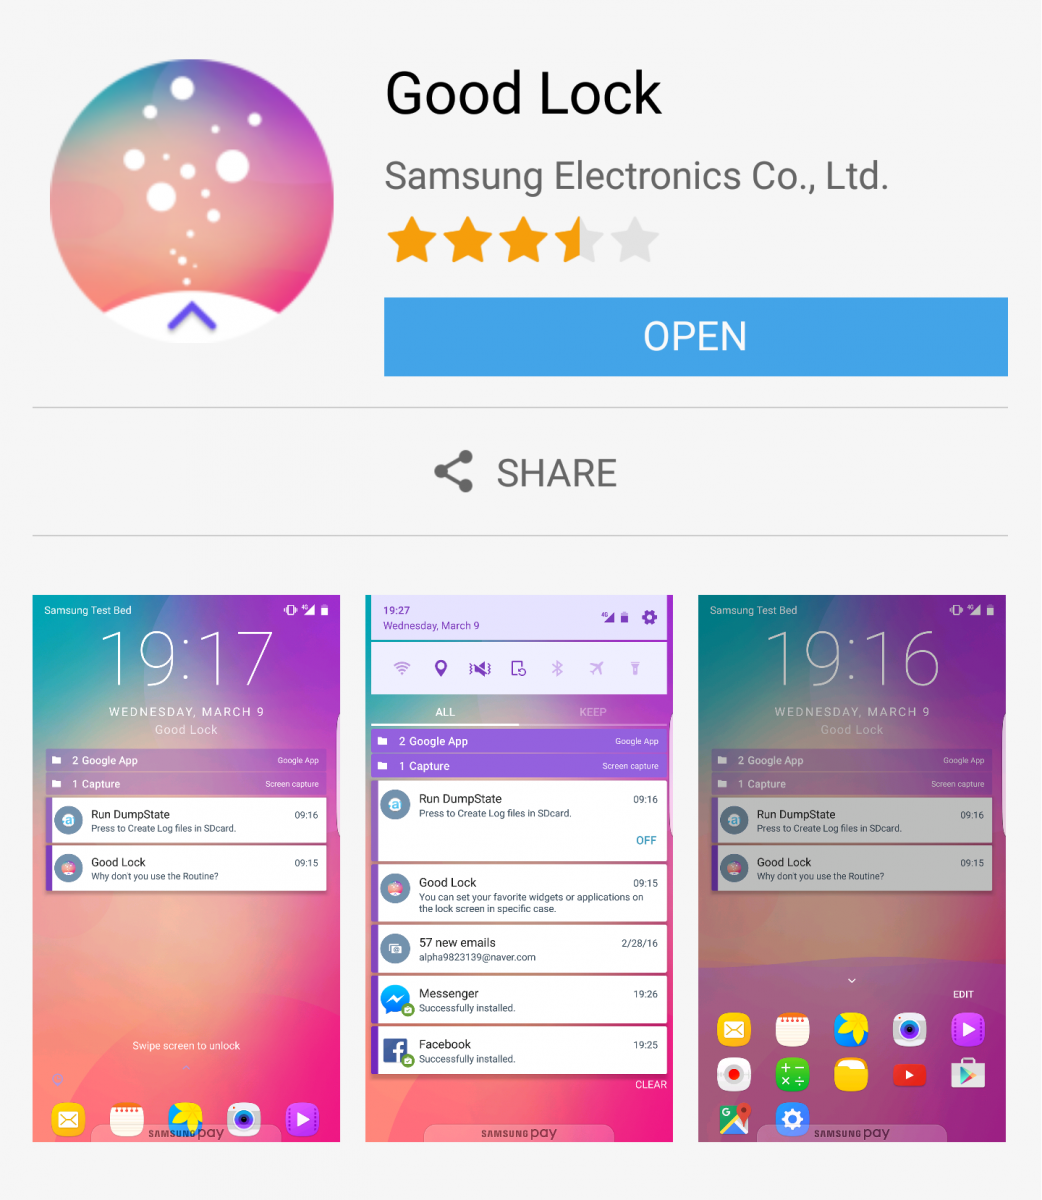 How to install Samsung Good Lock on Phones running Android Oreo